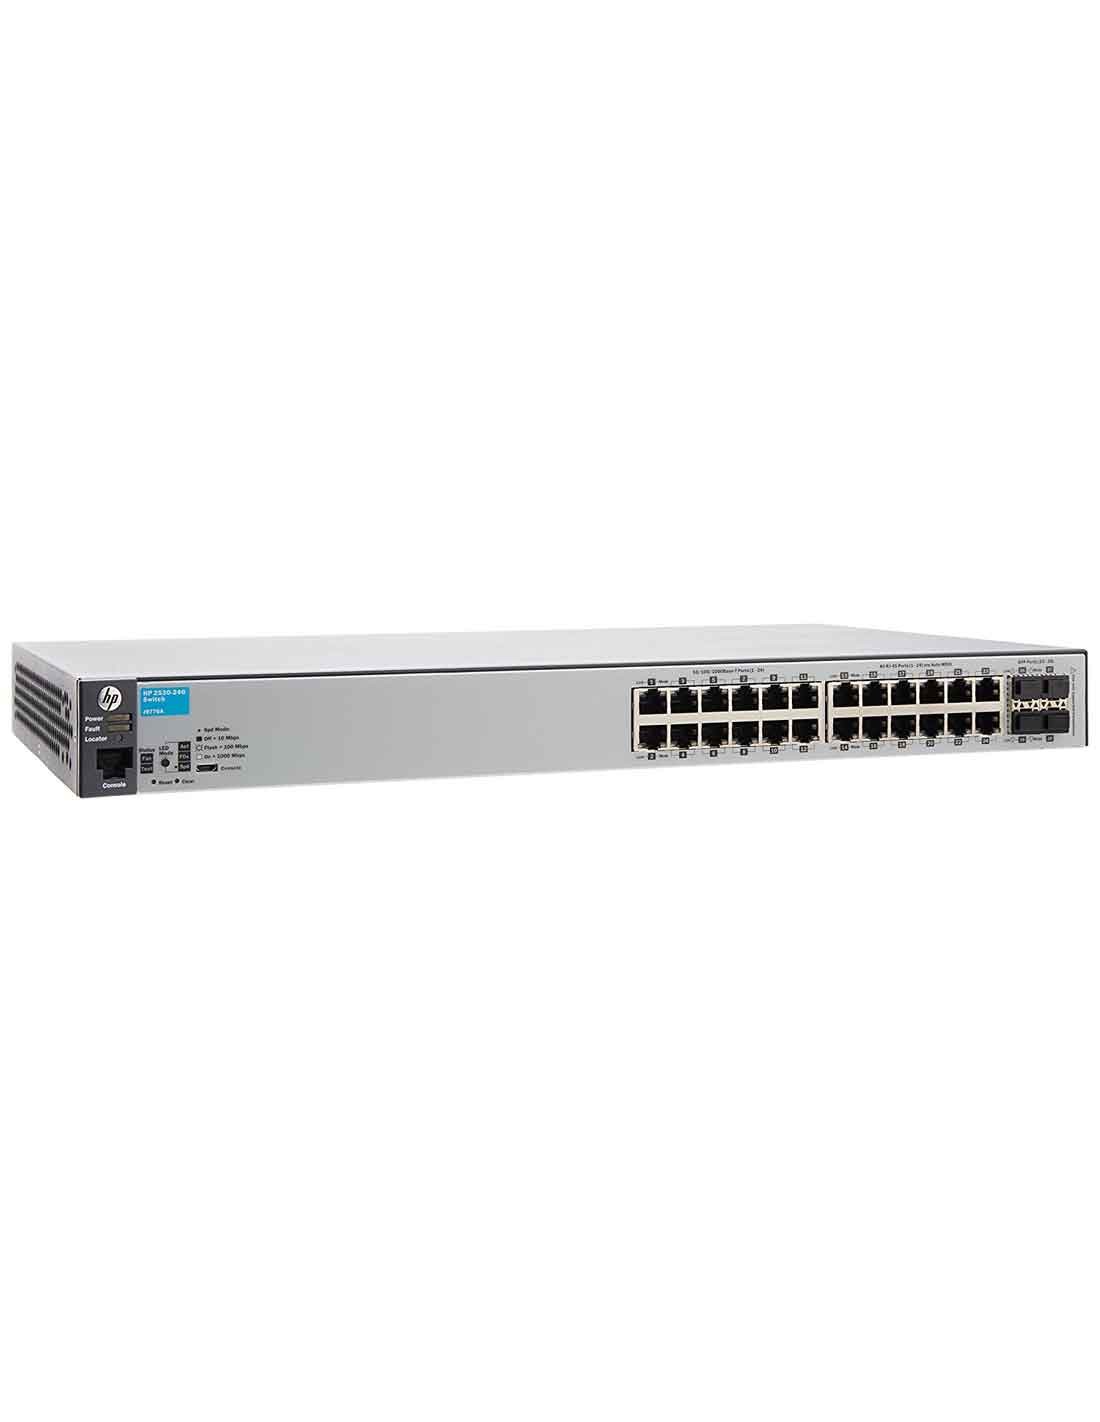 Aruba 2530 24G Switch J9776A at a cheap price and free delivery in Dubai